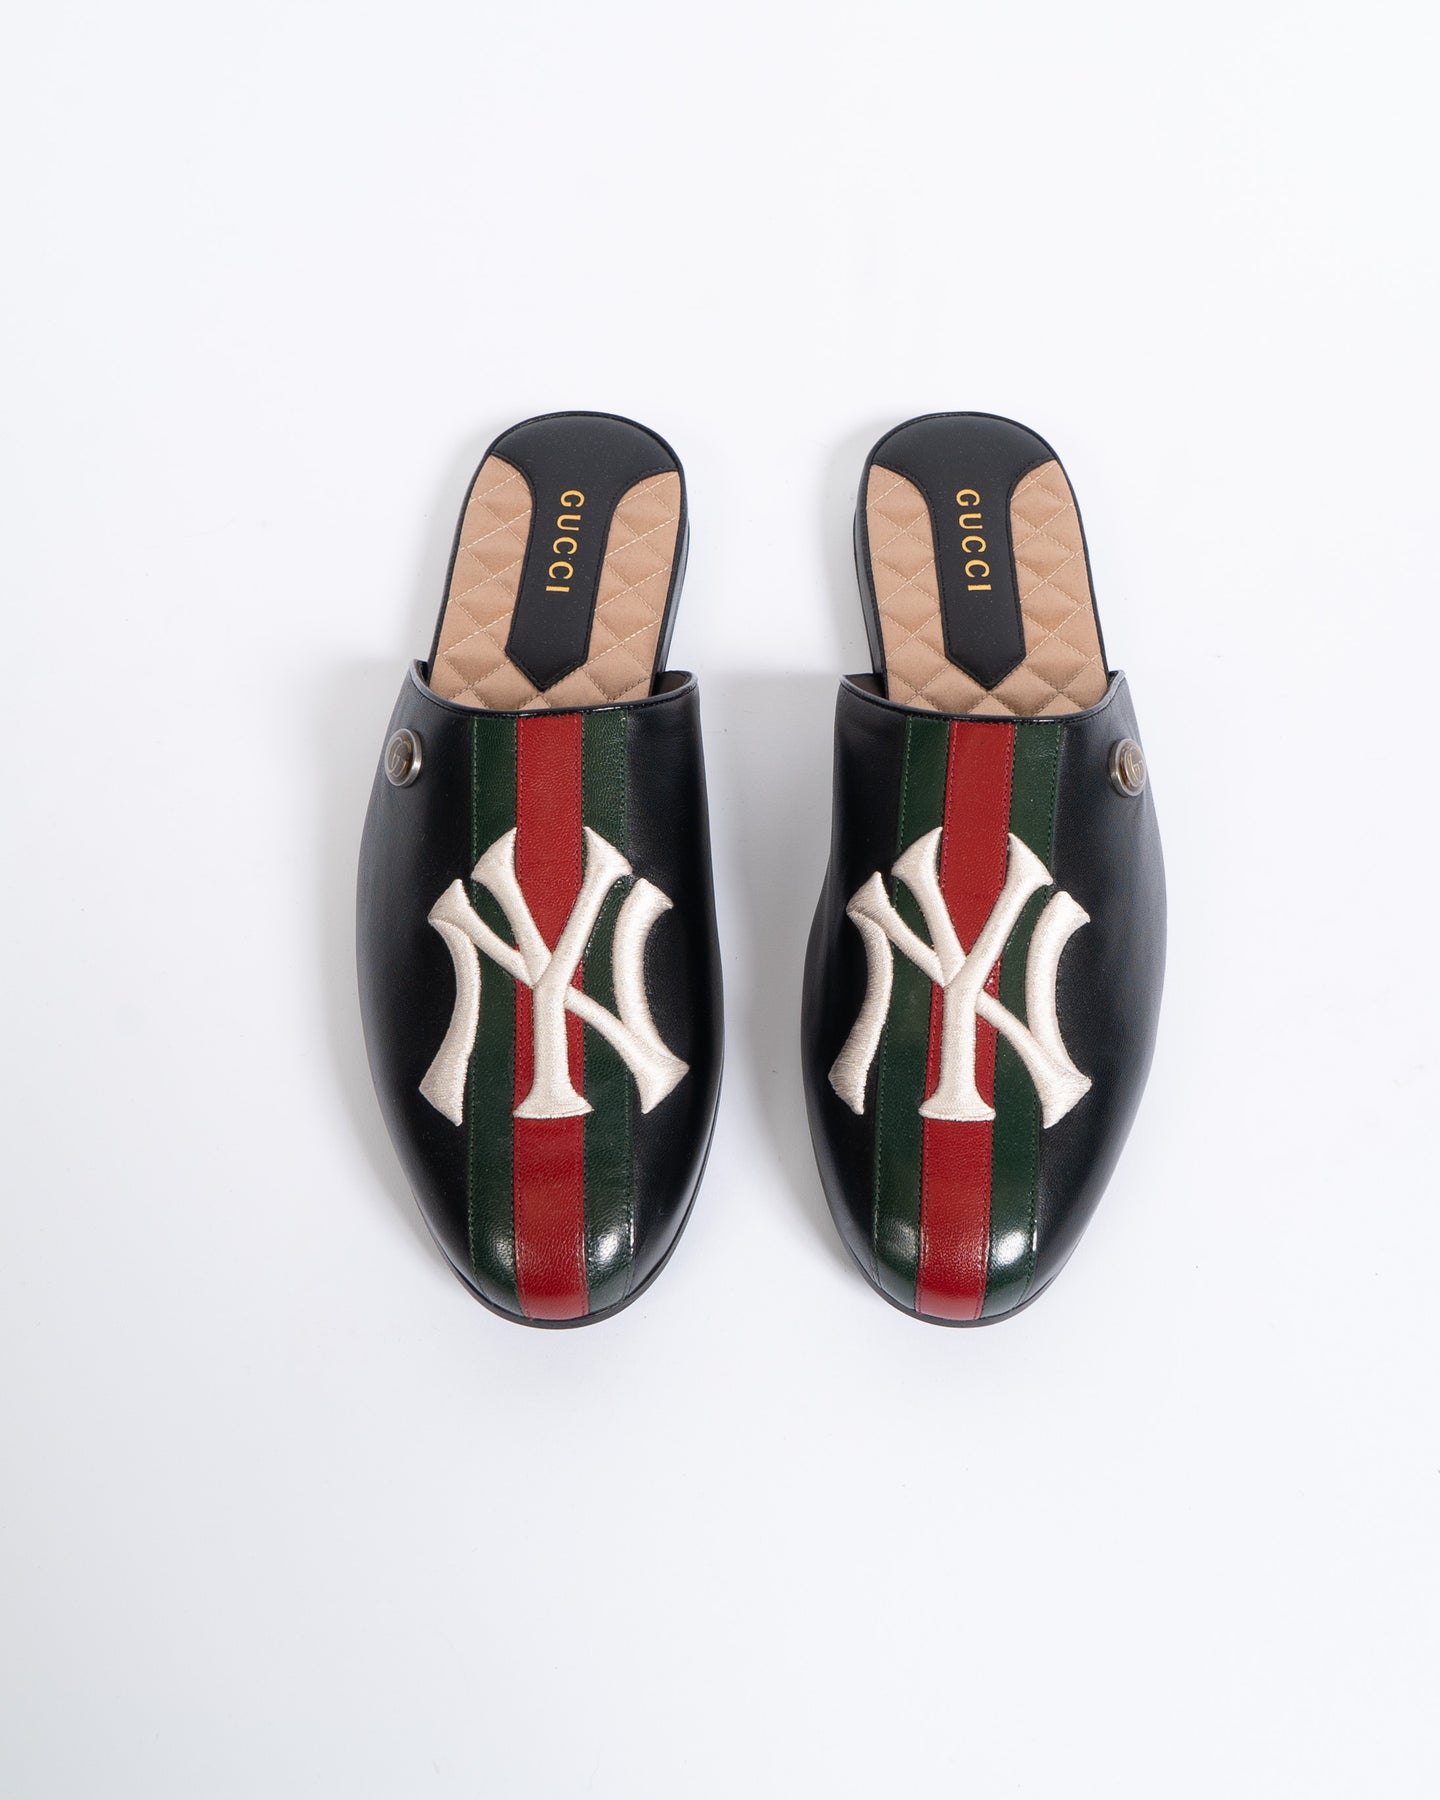 NY Yankees Leather Slip-on Loafers